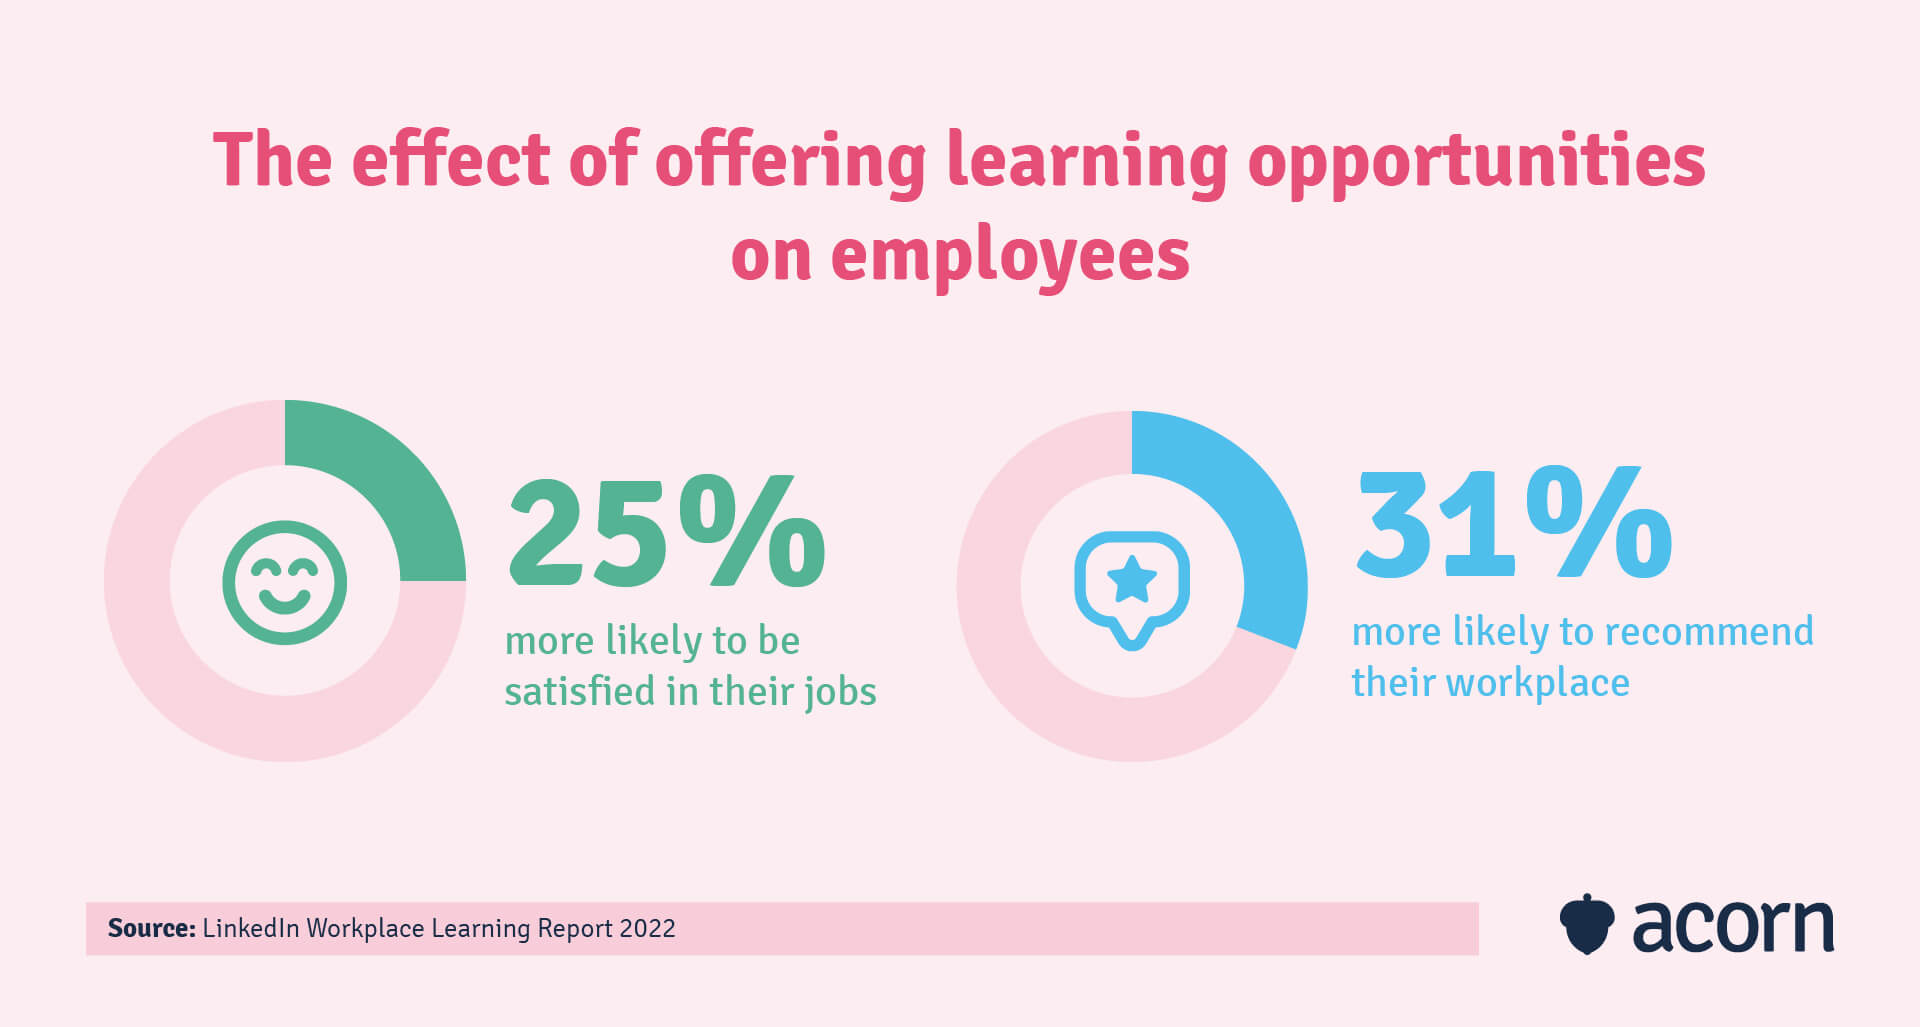 The effect on employees of offering learning opportunities